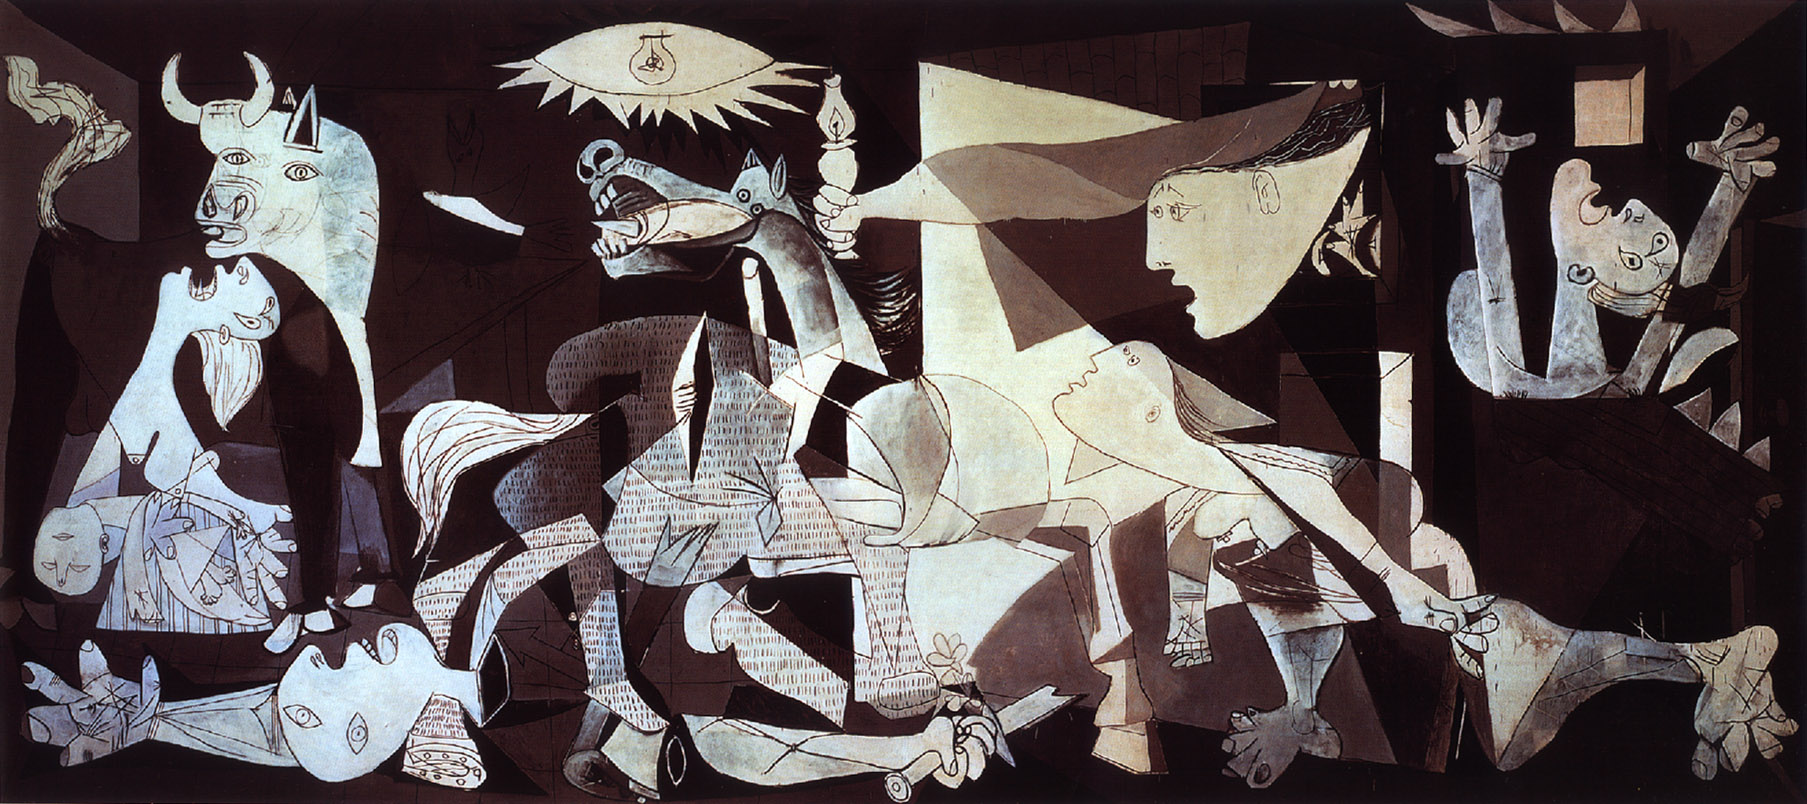 Image of Picasso's Guernica, featuring many impressions of animals and people in conflict.